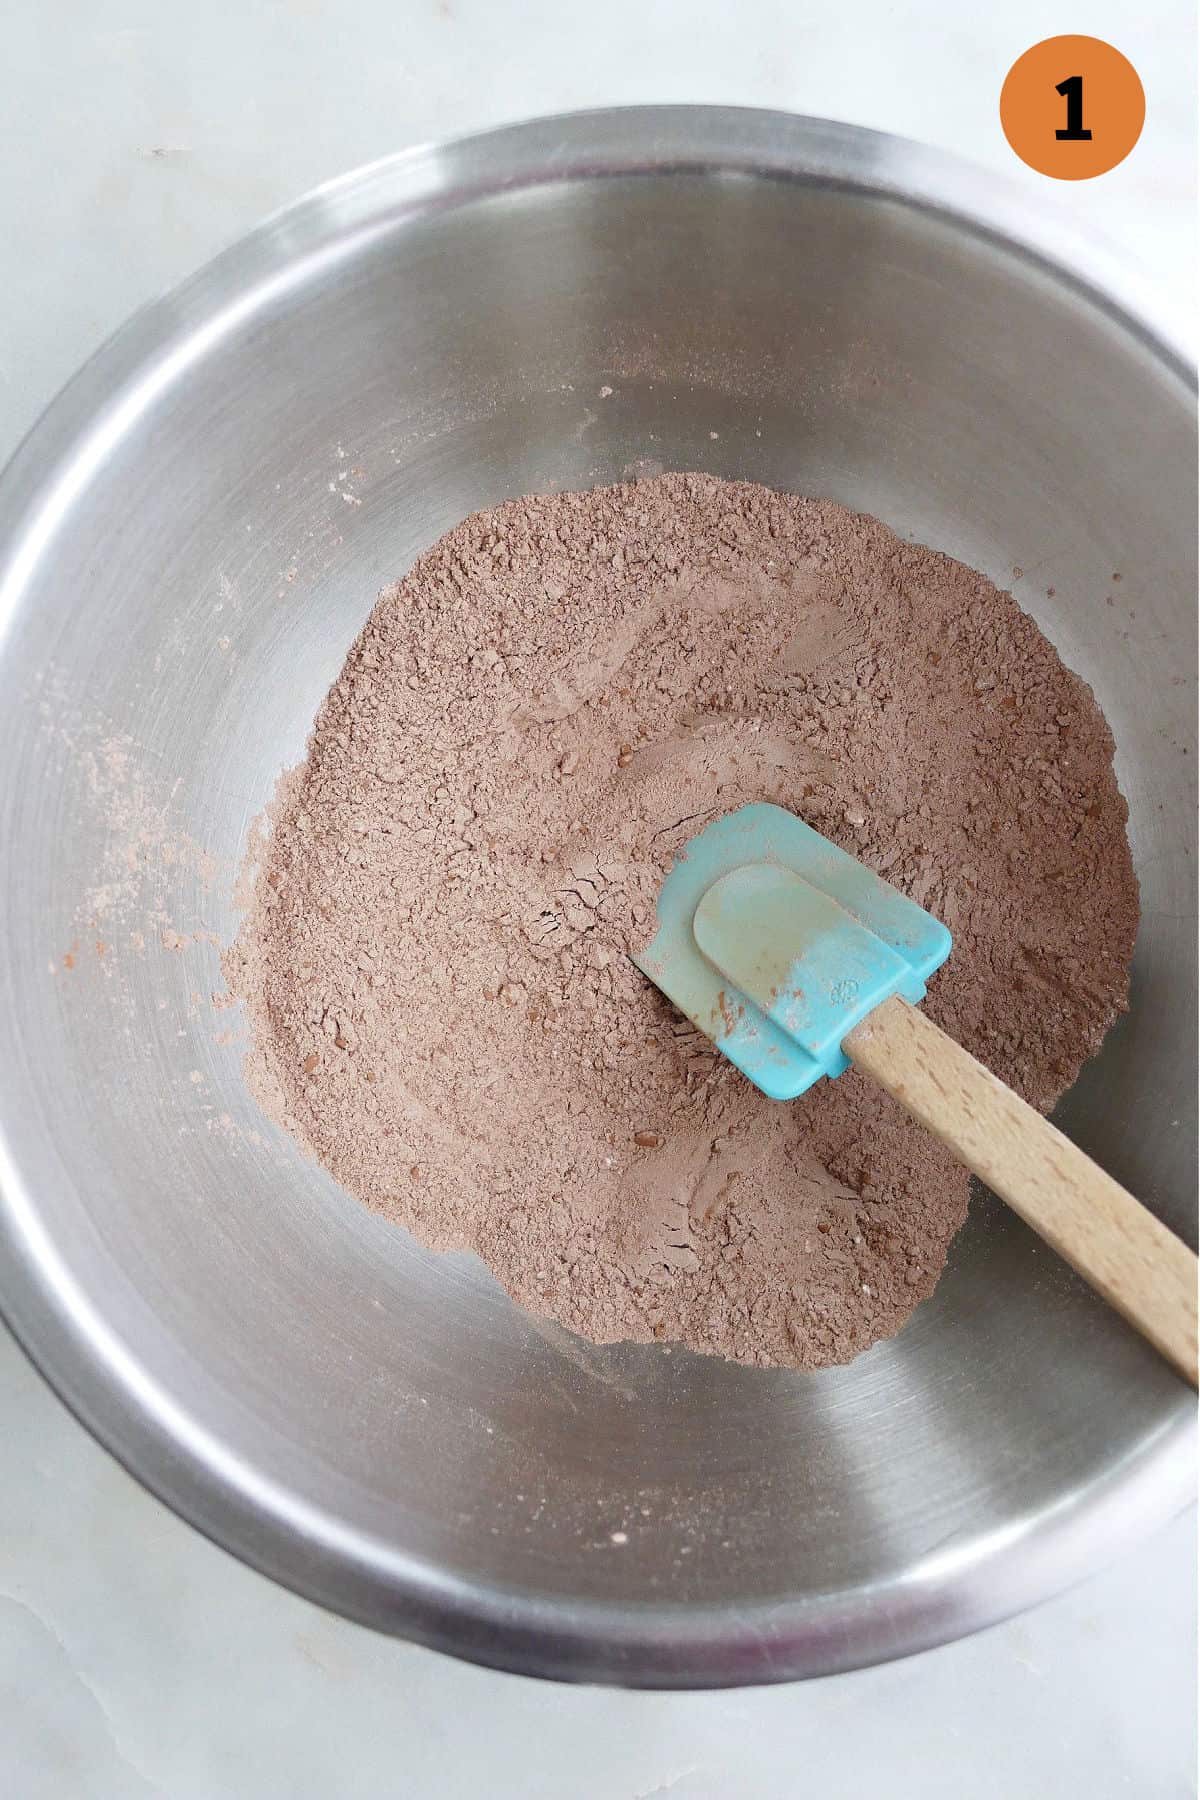 cocoa powder, flour, and other dry ingredients in a mixing bowl with a rubber spatula